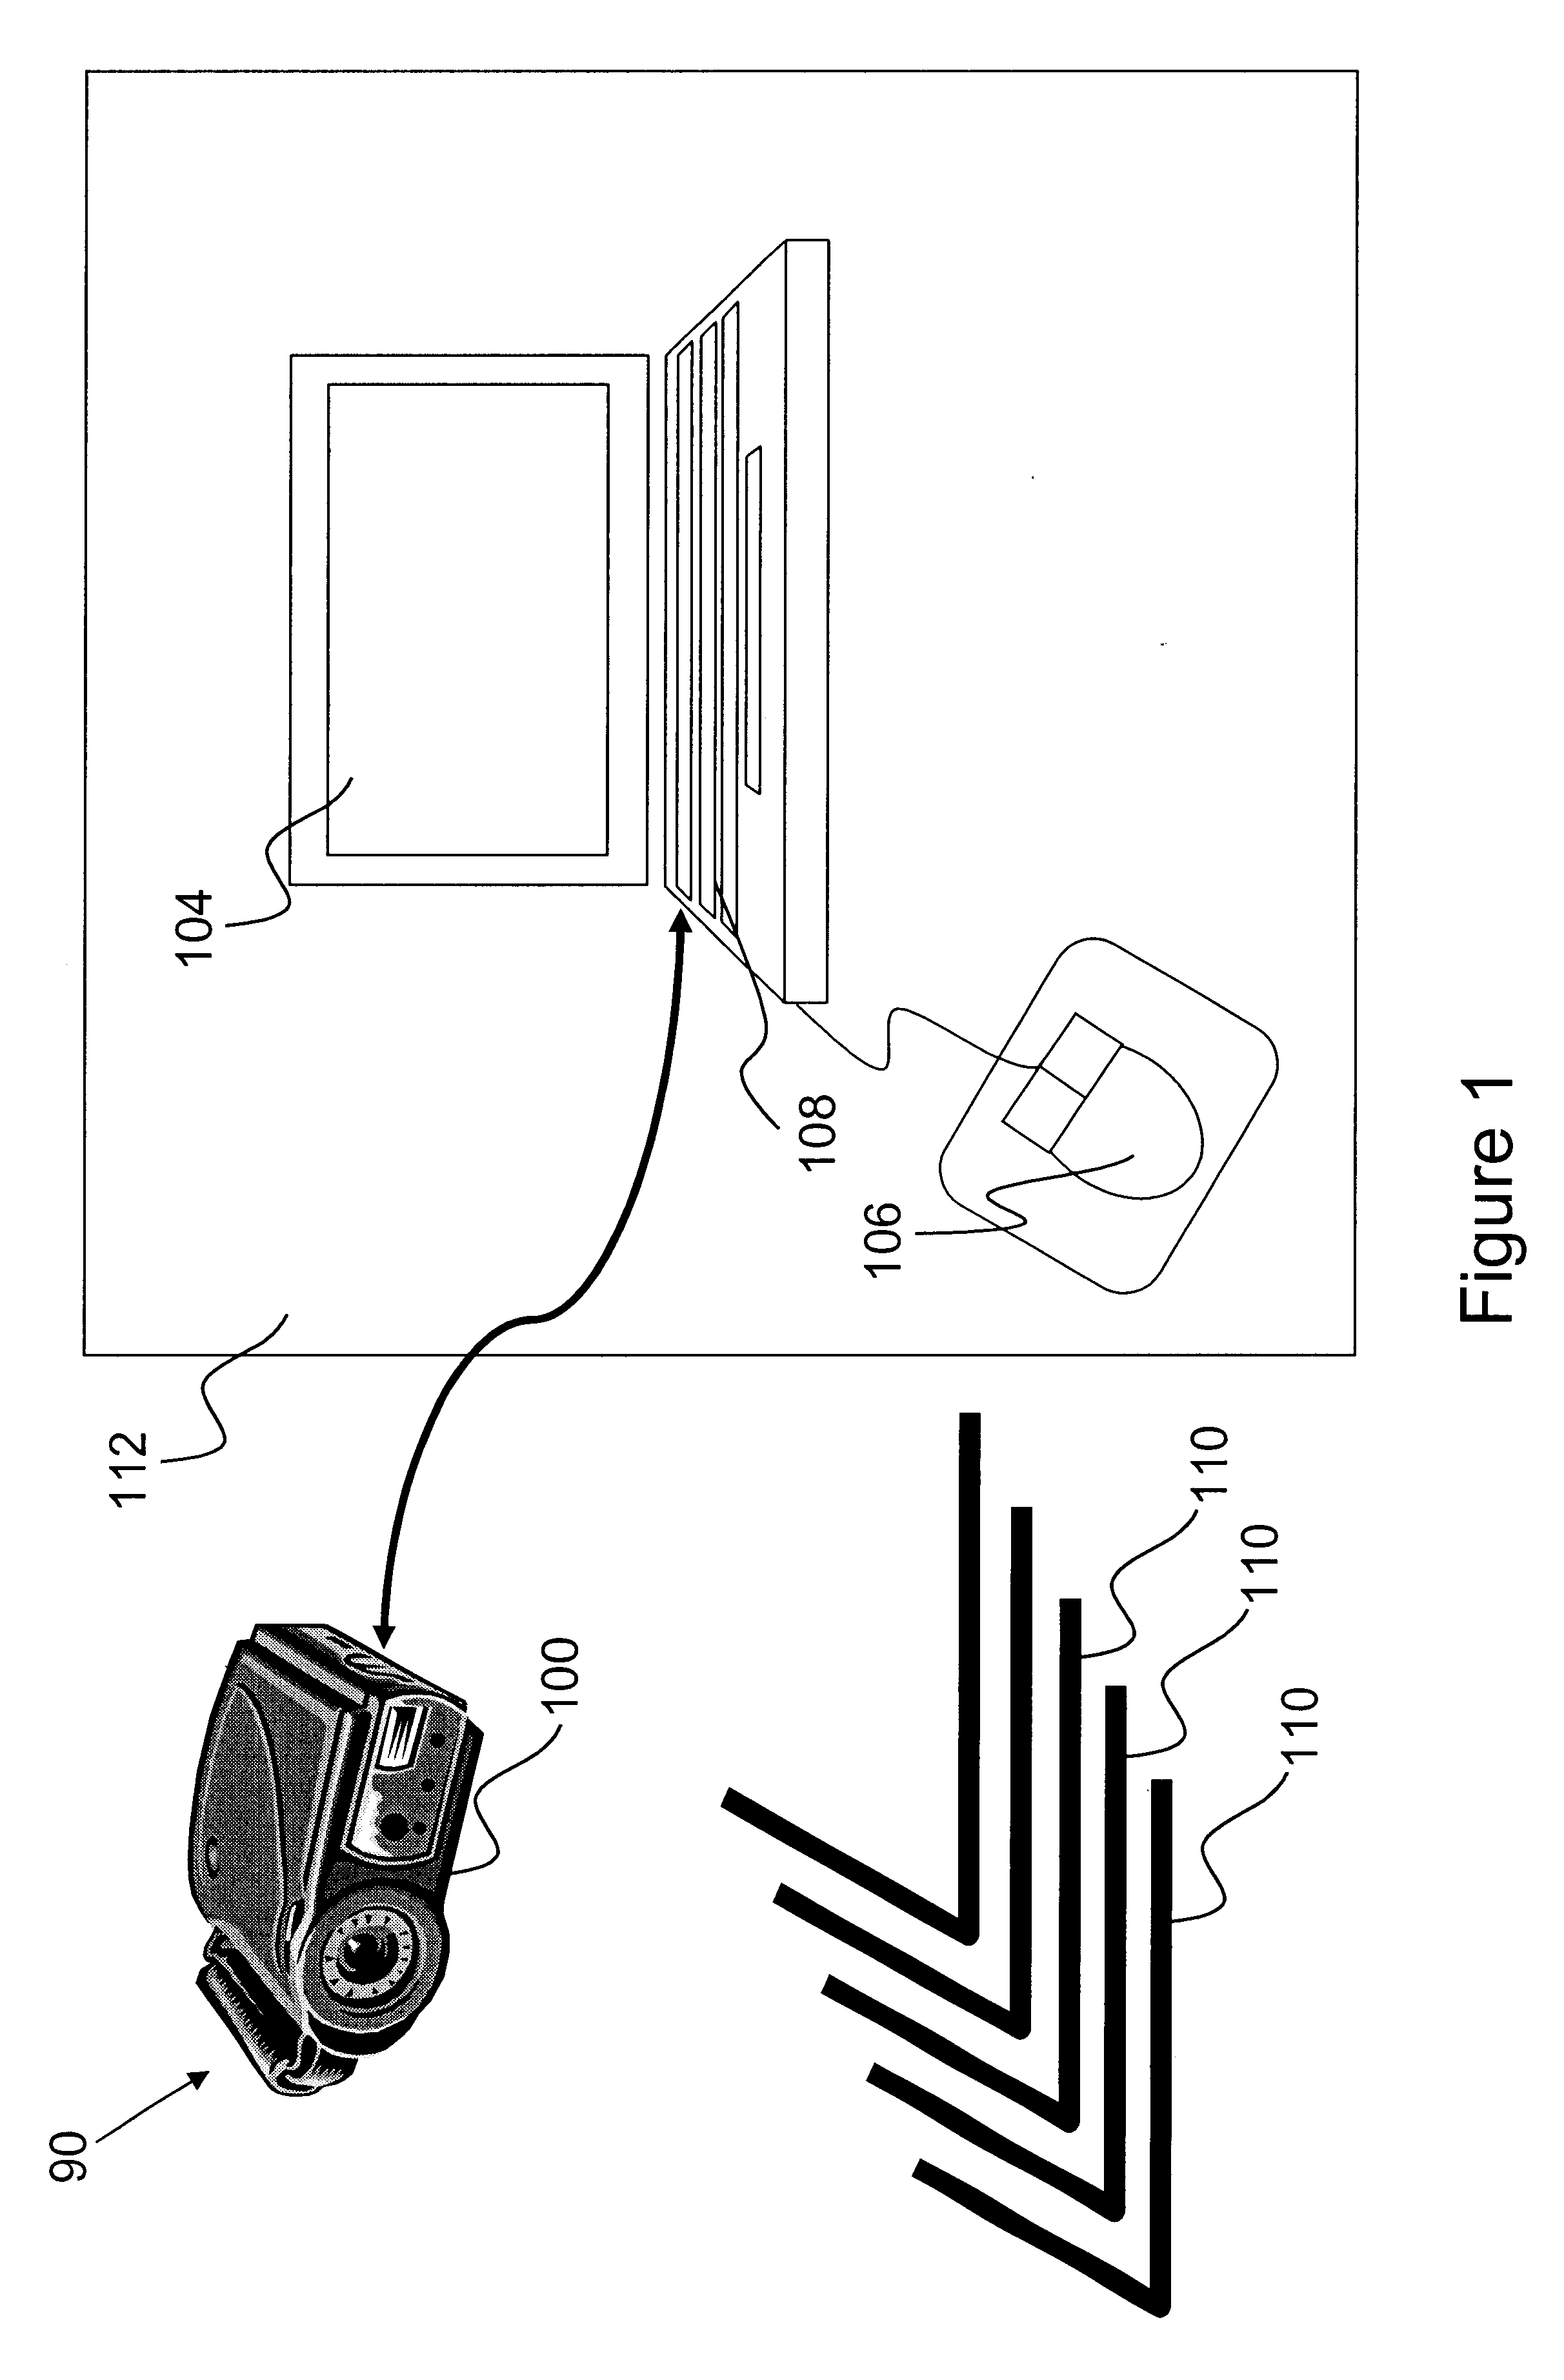 Method and apparatus for simulating the appearance of paving stone on an existing driveway